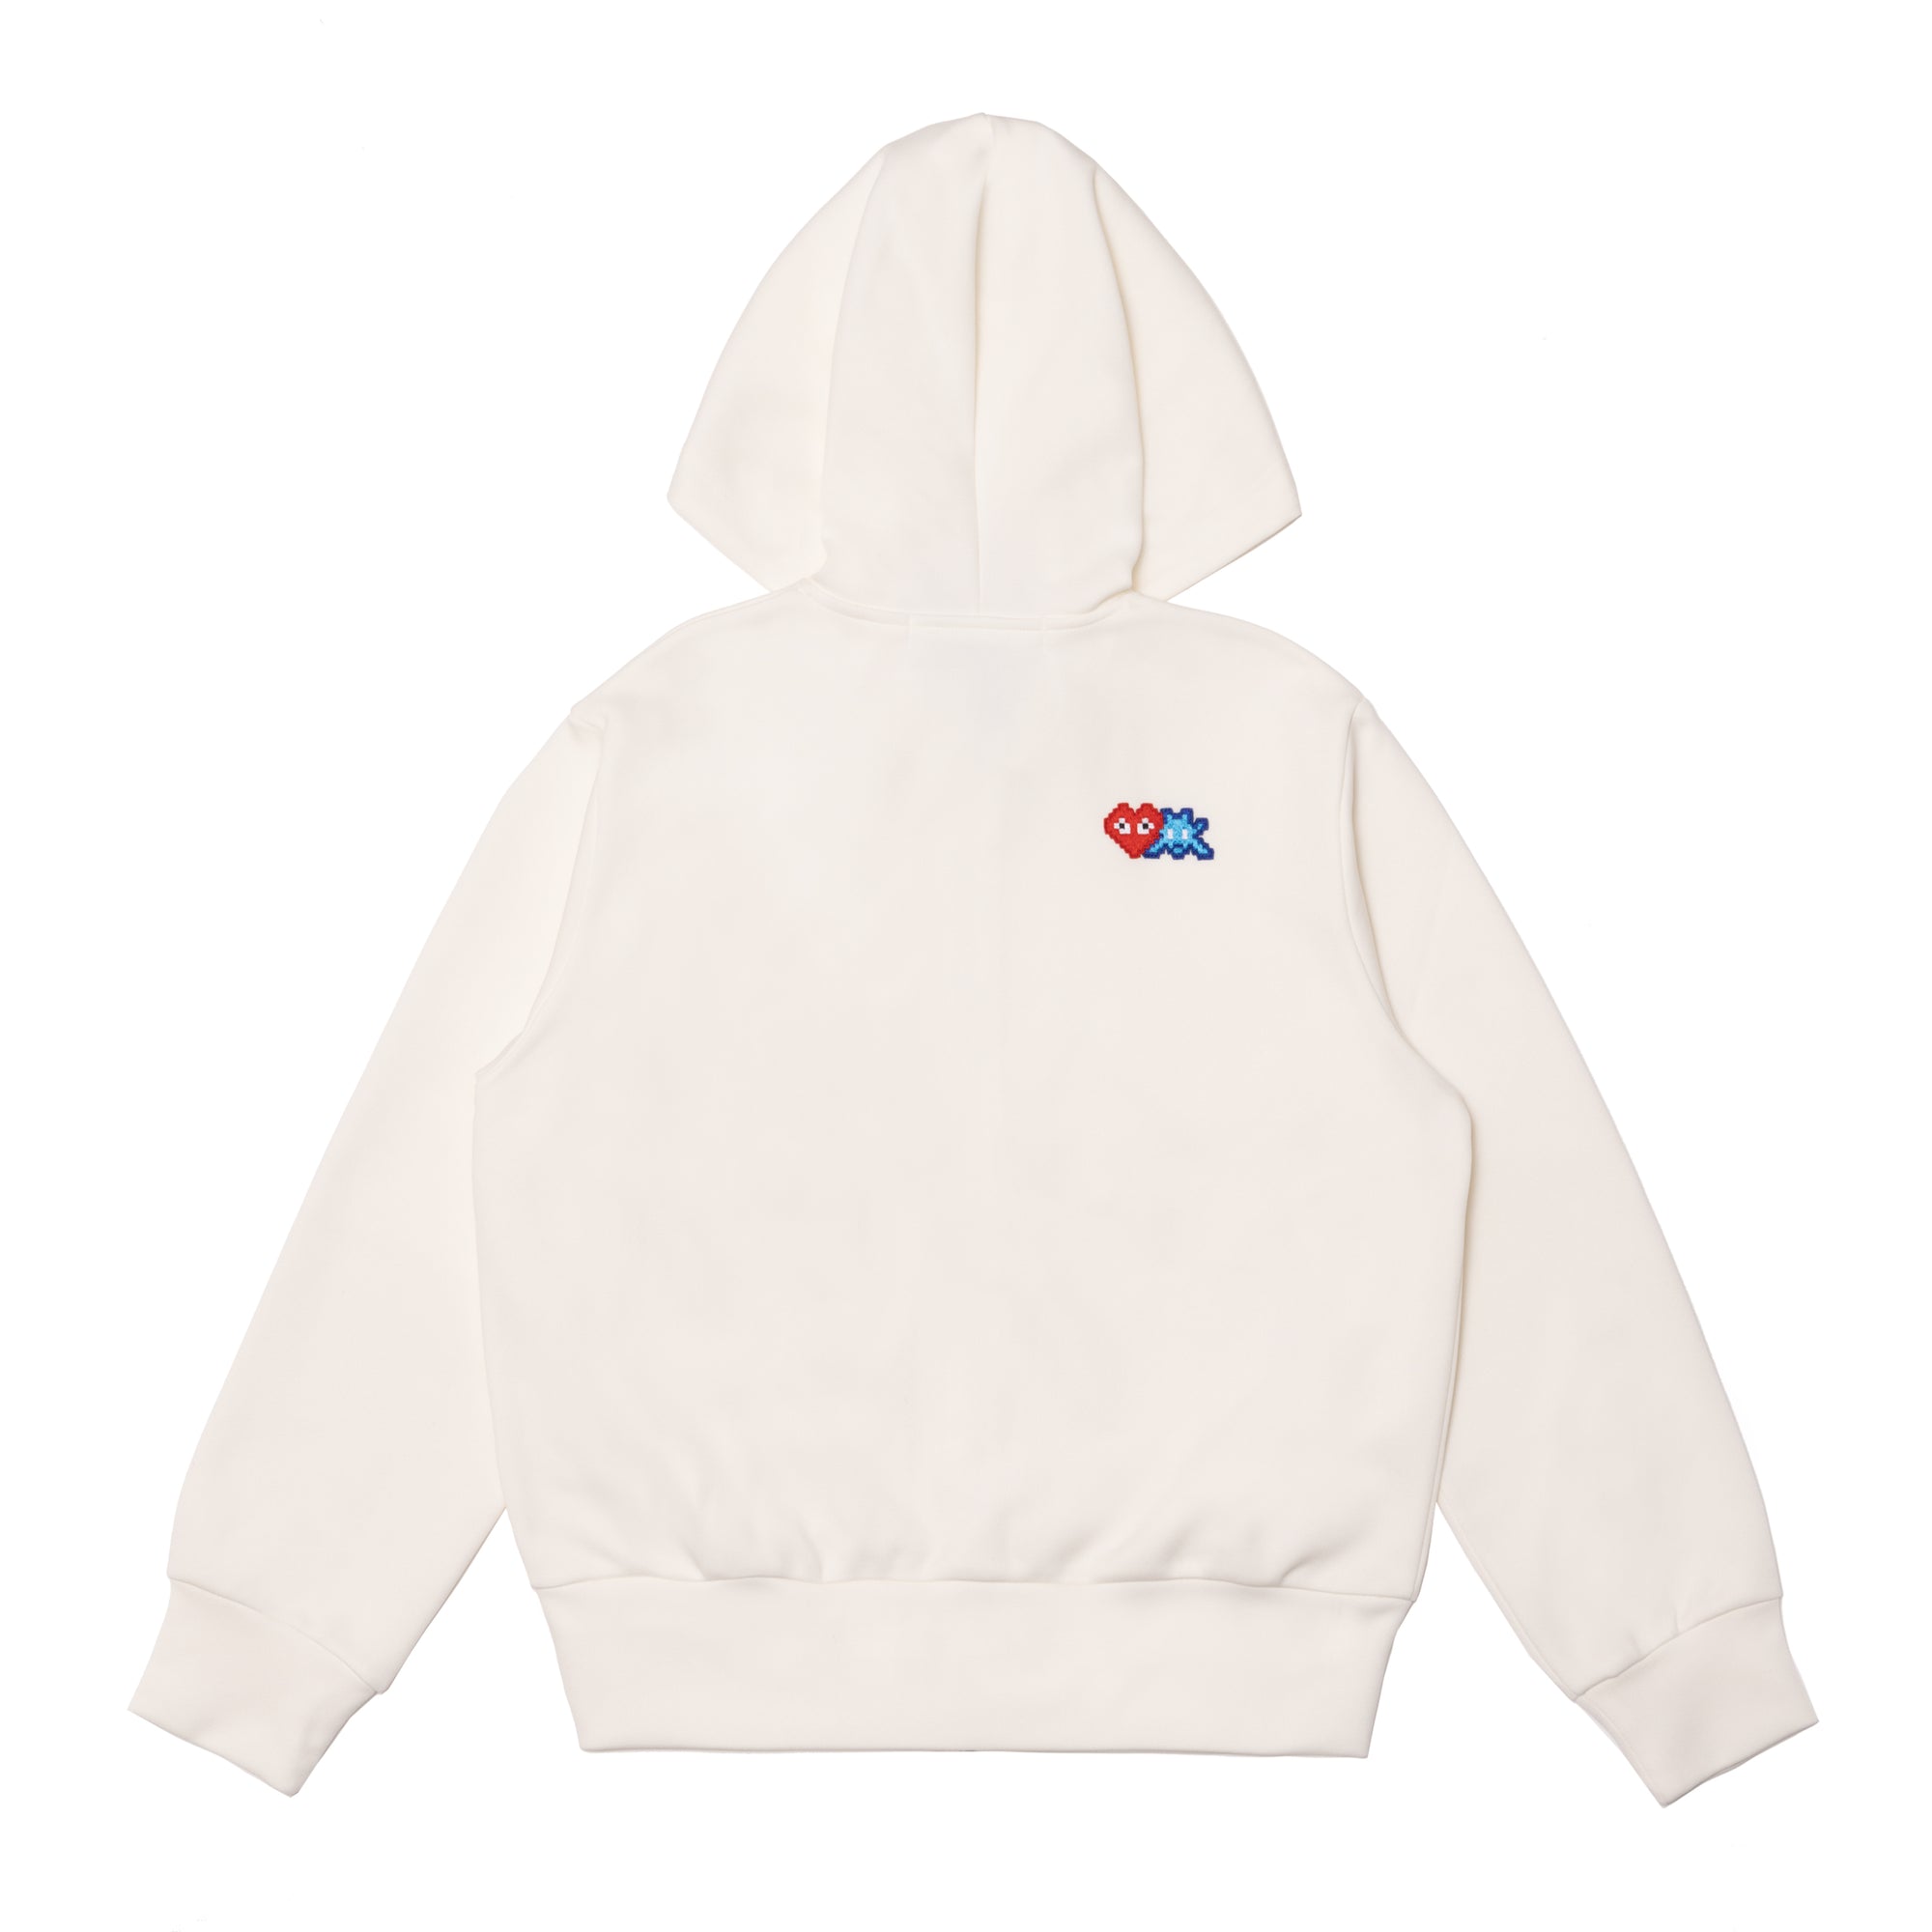 PLAY CDG - INVADER Polyester Hooded Sweater - (Off White) view 1